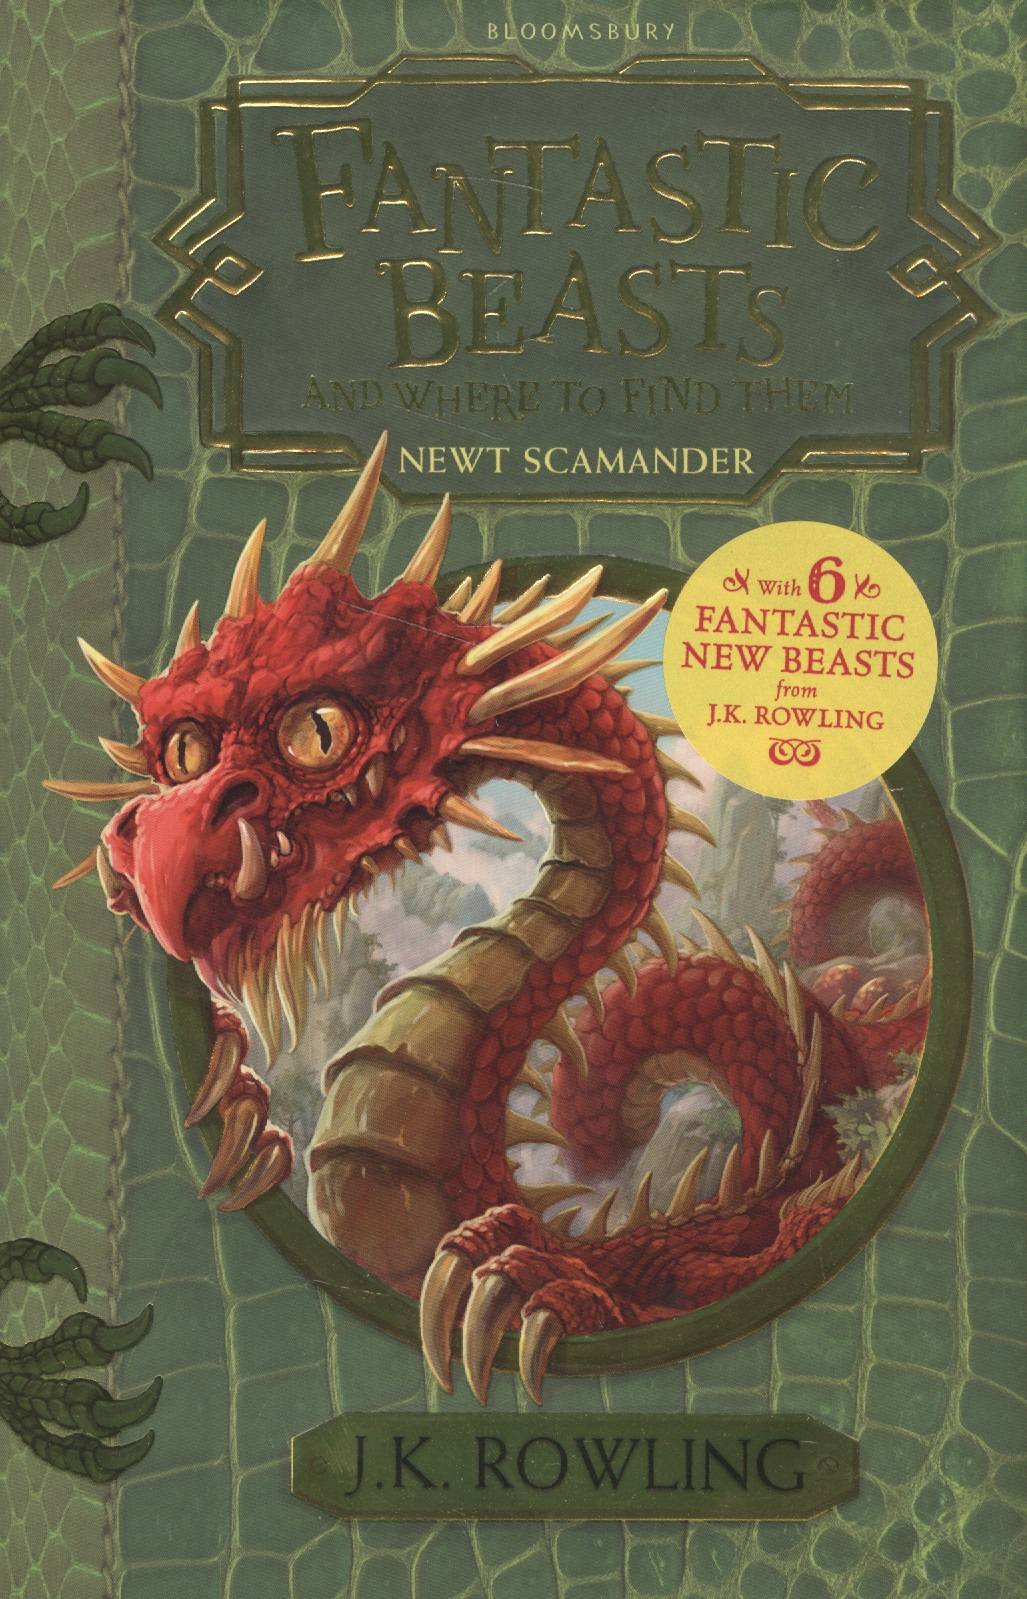 Fantastic Beasts and Where to Find Them New Scamander